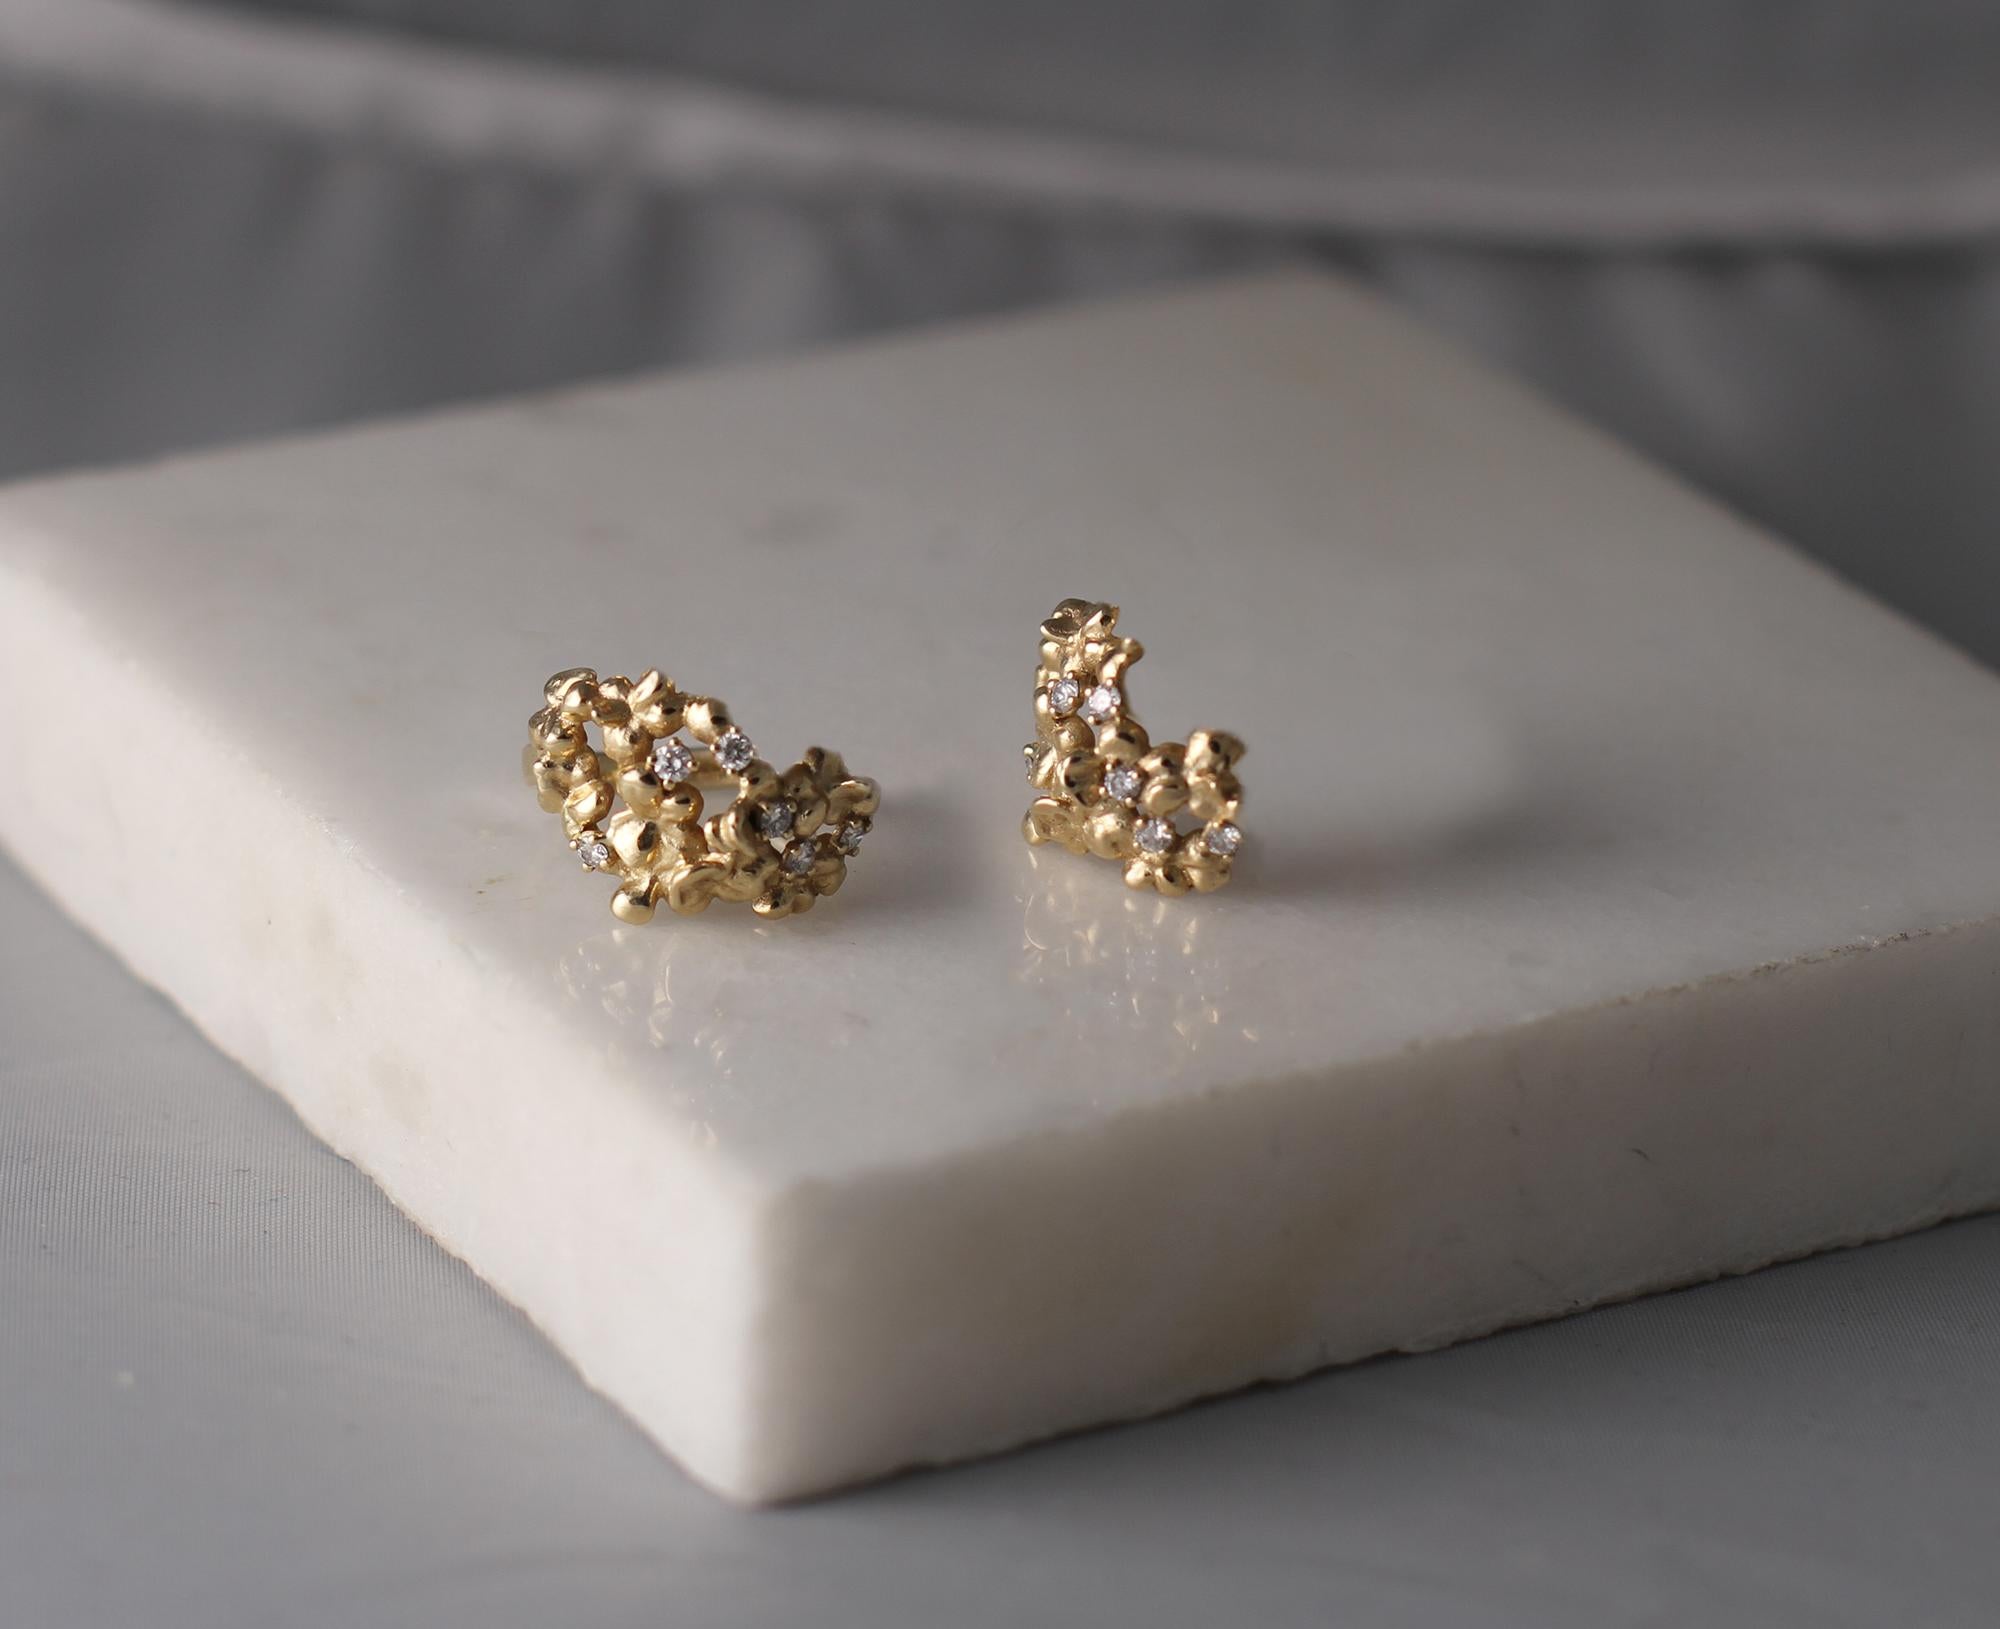 This contemporary Hortensia stud earrings are in 18 karat rose gold with round natural diamonds, VS, F-G. The sculptural design adds the extra highlights to the surface of the gold. The diamonds add the delicate blinks. This jewellery collection was